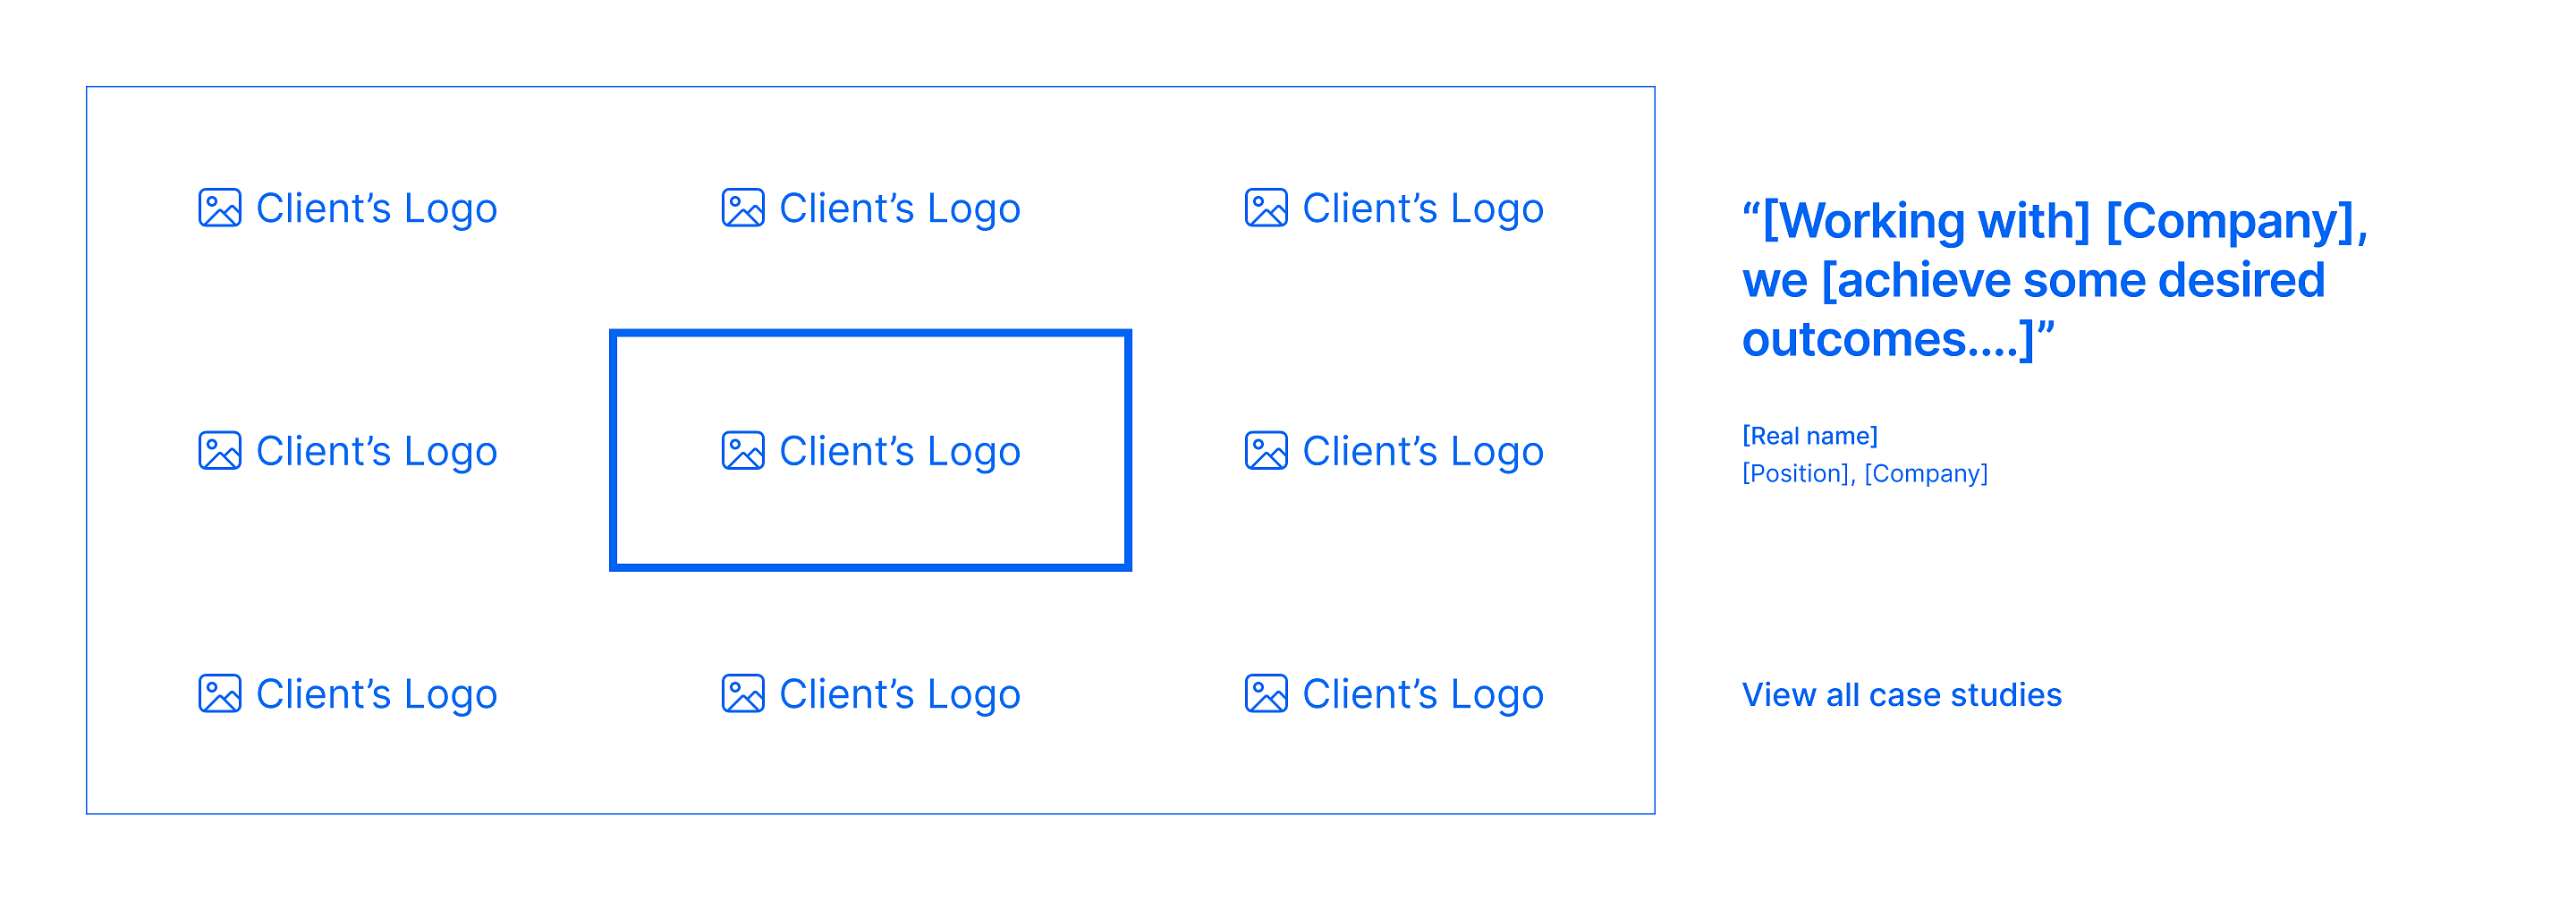 Blueprint of grid of client logos and testimonials